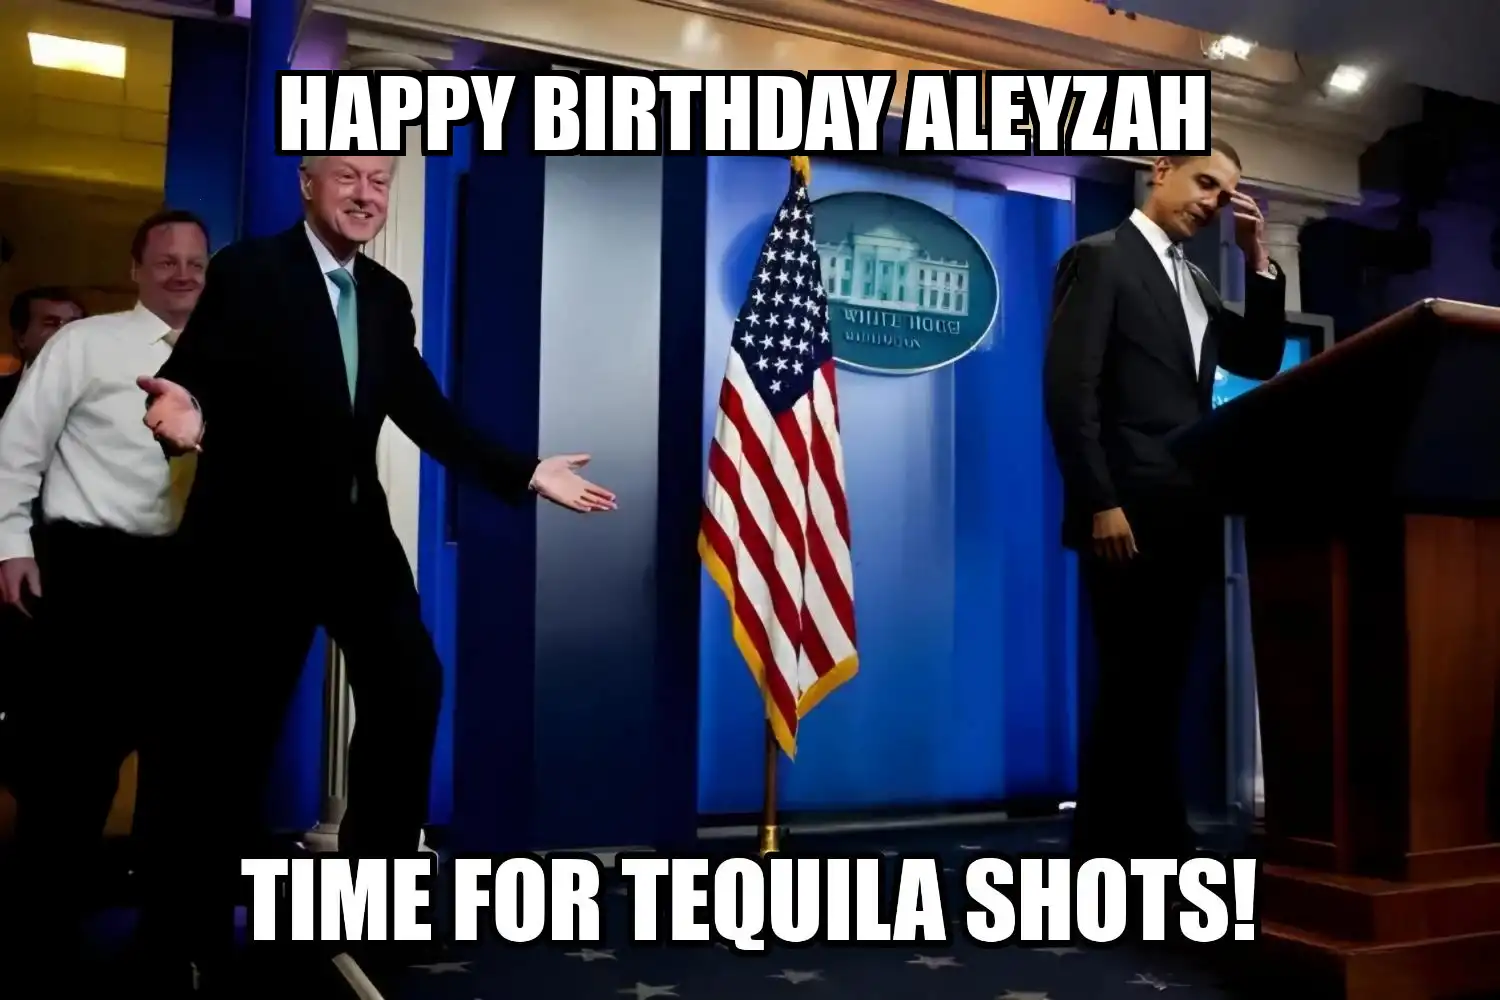 Happy Birthday Aleyzah Time For Tequila Shots Memes